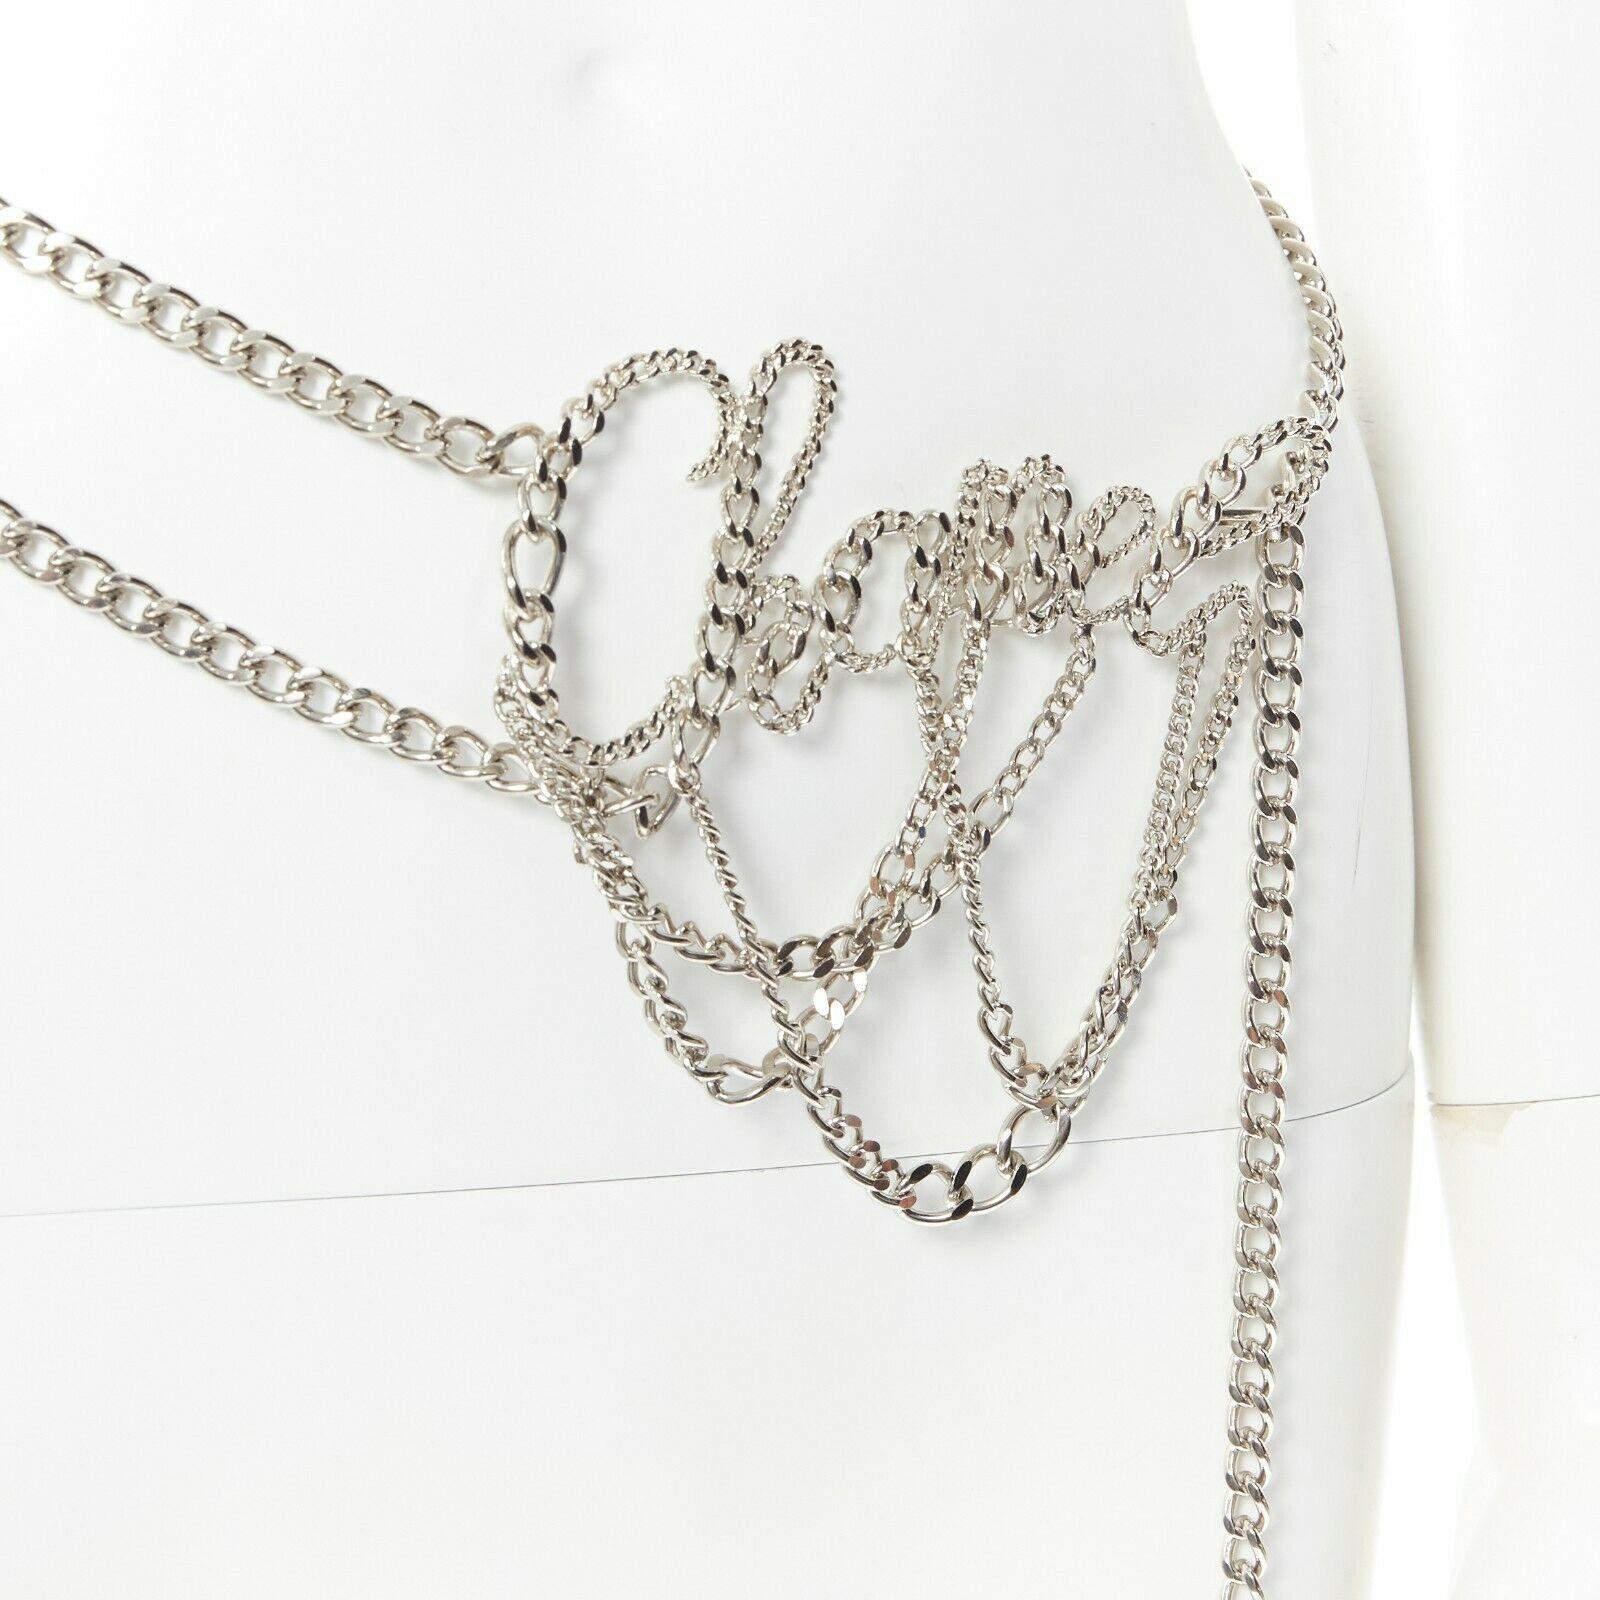 CHANEL KARL LAGERFELD 06P silver cursive logo draped chain punk belt necklace
Brand: CHANEL
Designer: Karl Lagerfeld
Collection: 06P
Model Name / Style: Chain belt
Material: Metal
Color: Silver
Pattern: Solid
Closure: Hook & Loop
Extra Detail: Heavy